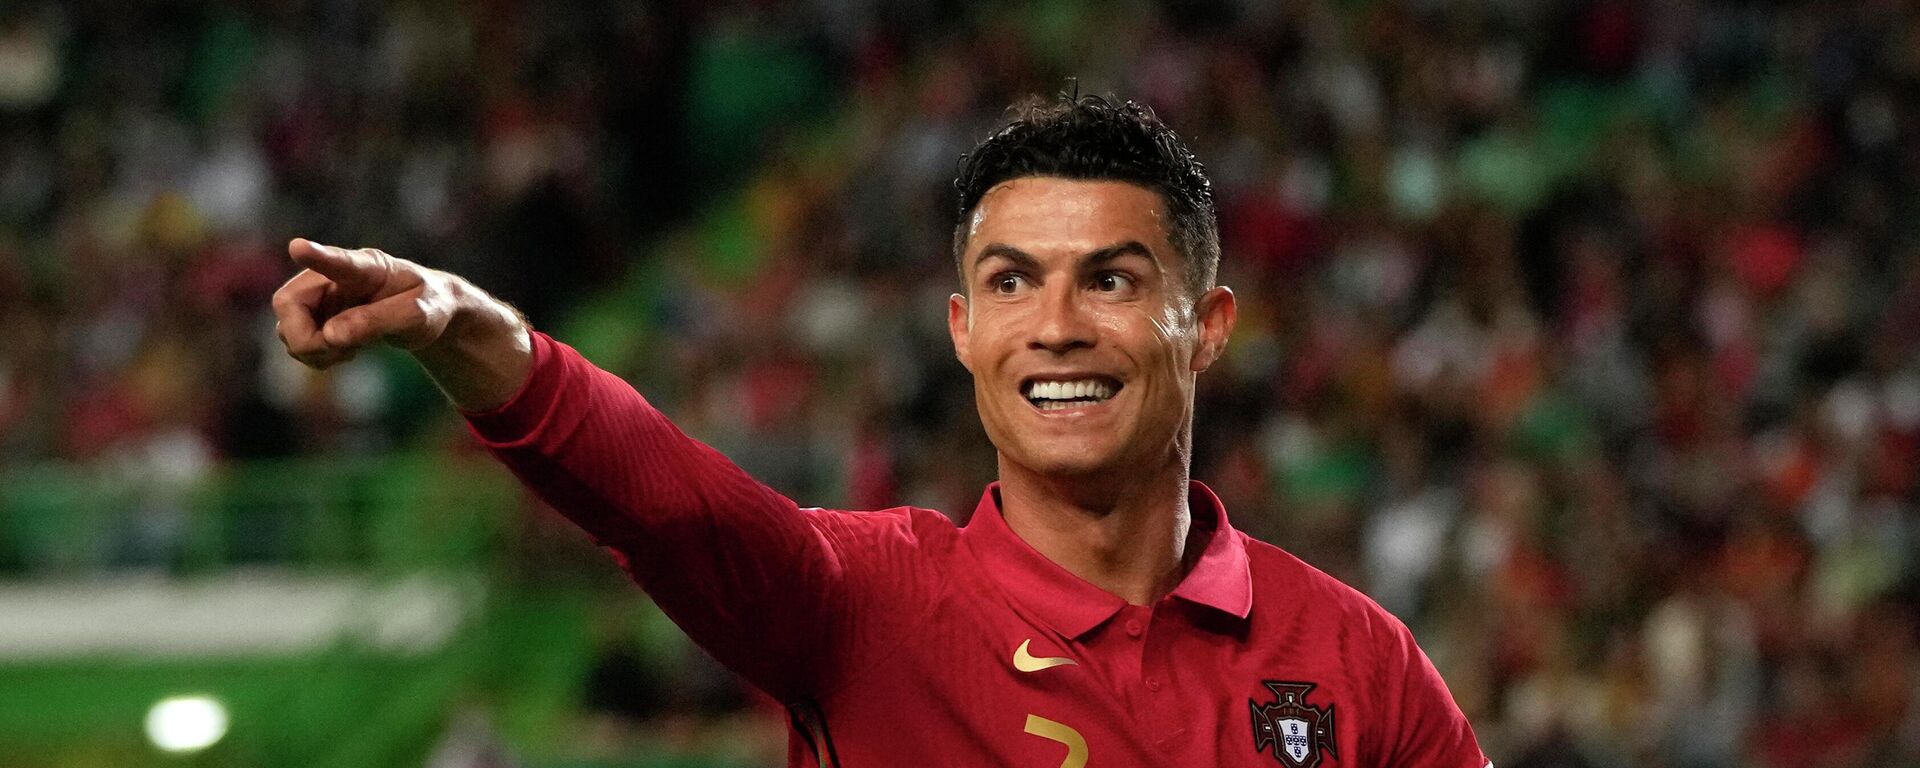 Portugal's Cristiano Ronaldo gestures during the UEFA Nations League soccer match between Portugal and Switzerland, at the Jose Alvalade Stadium in Lisbon, Portugal, Sunday, June 5, 2022 - Sputnik International, 1920, 22.07.2022